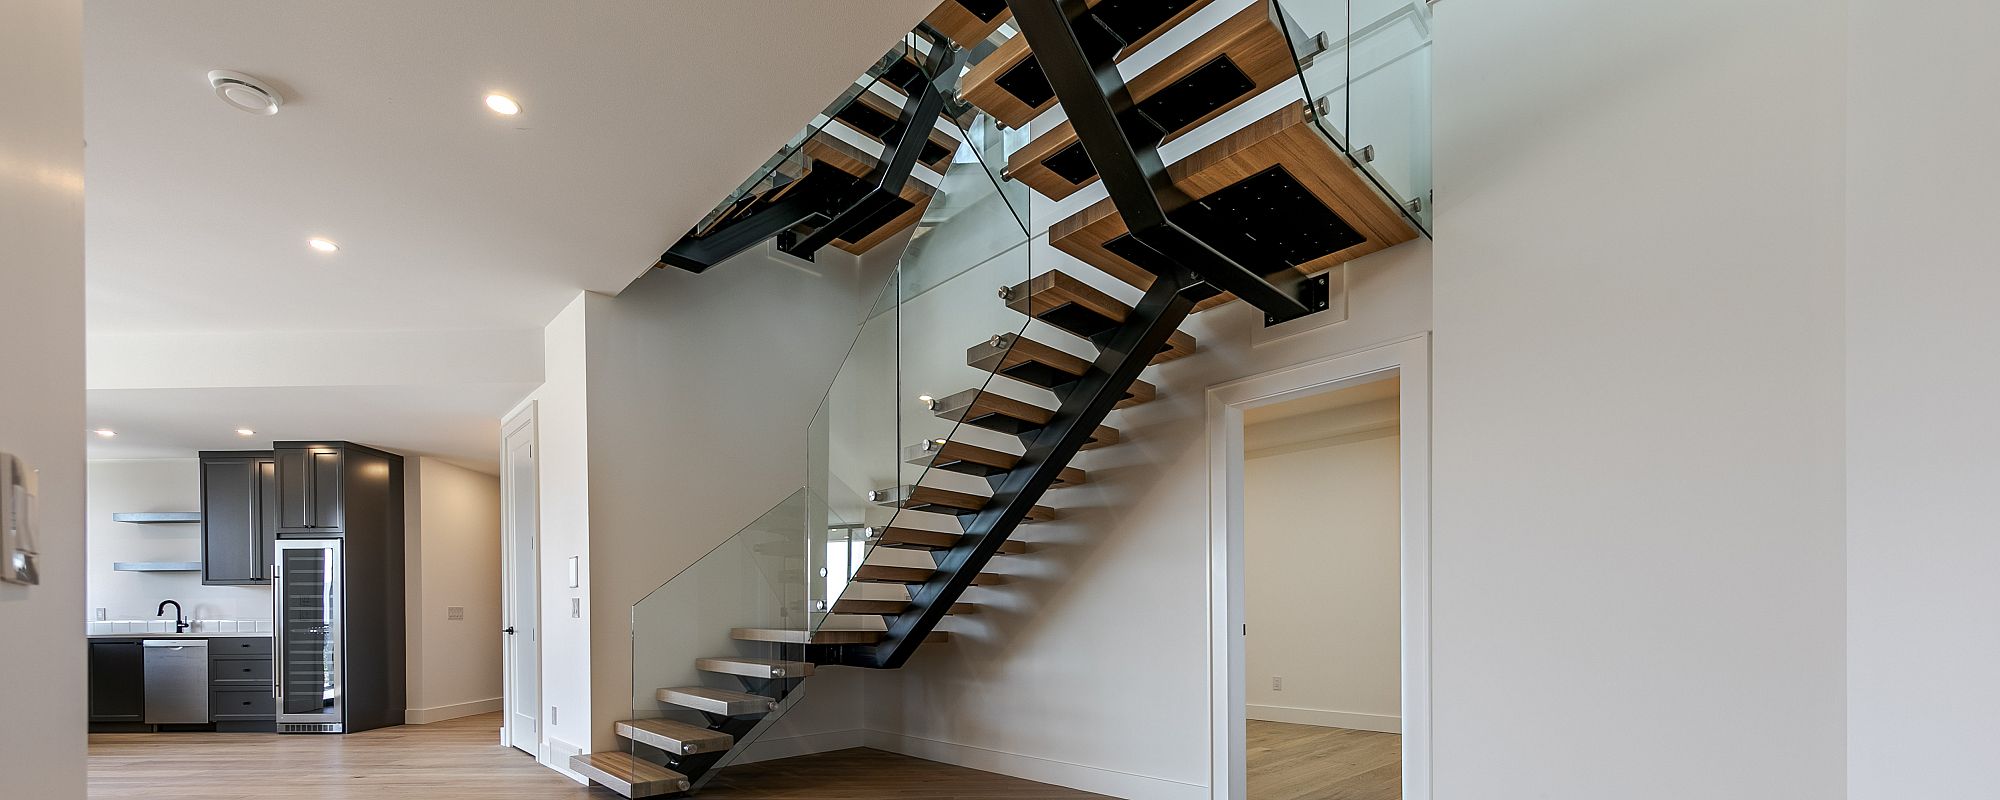 Feature staircase with wooden steps and black beams